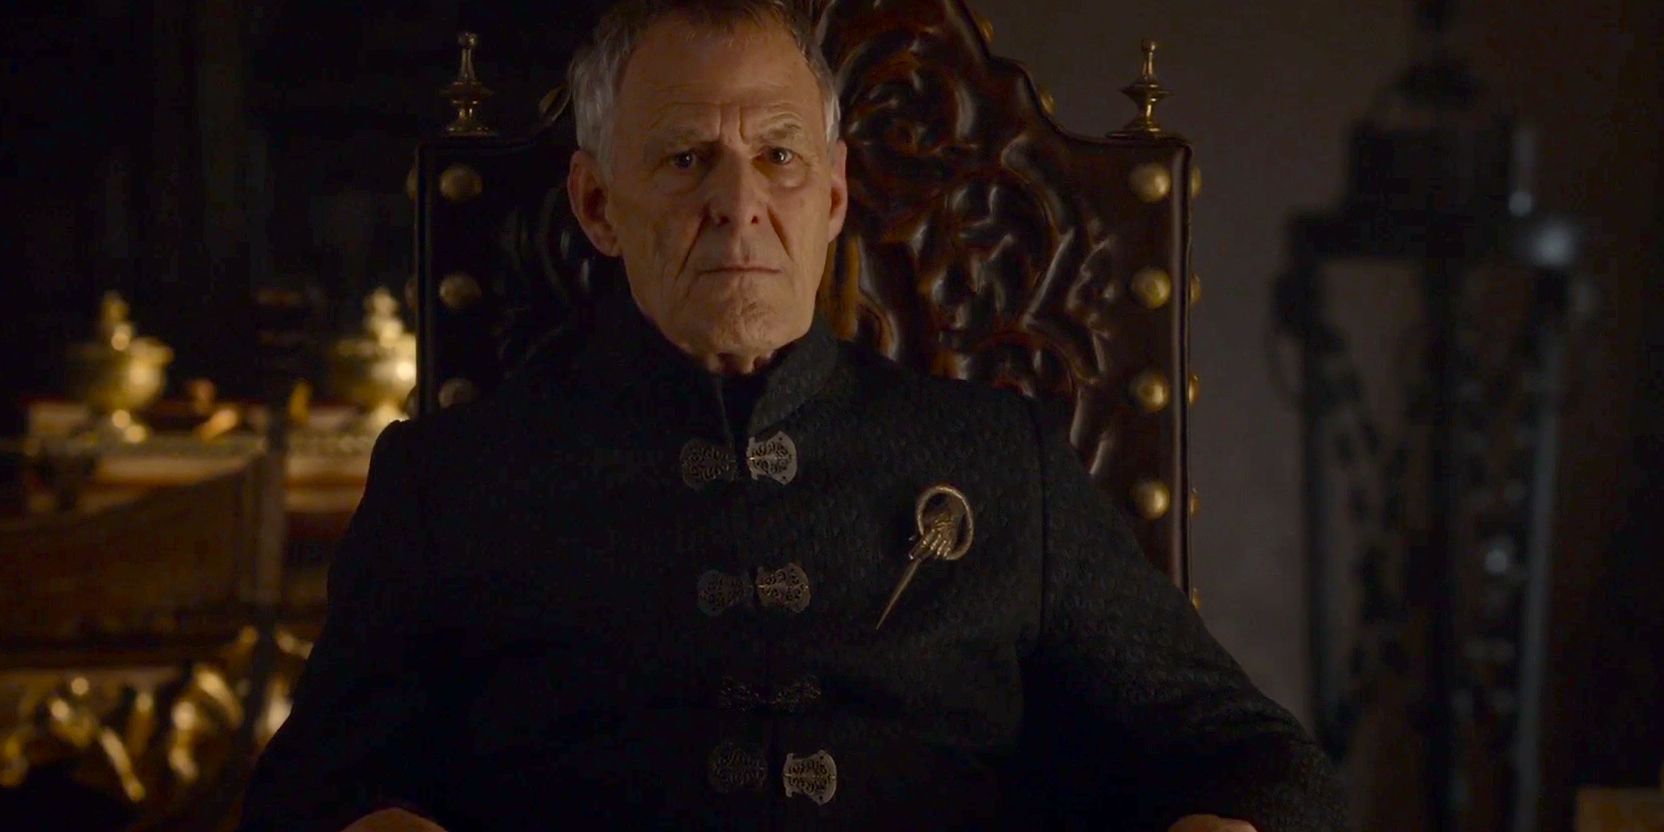 Kevan Lannister sitting on chair in Game of Thrones